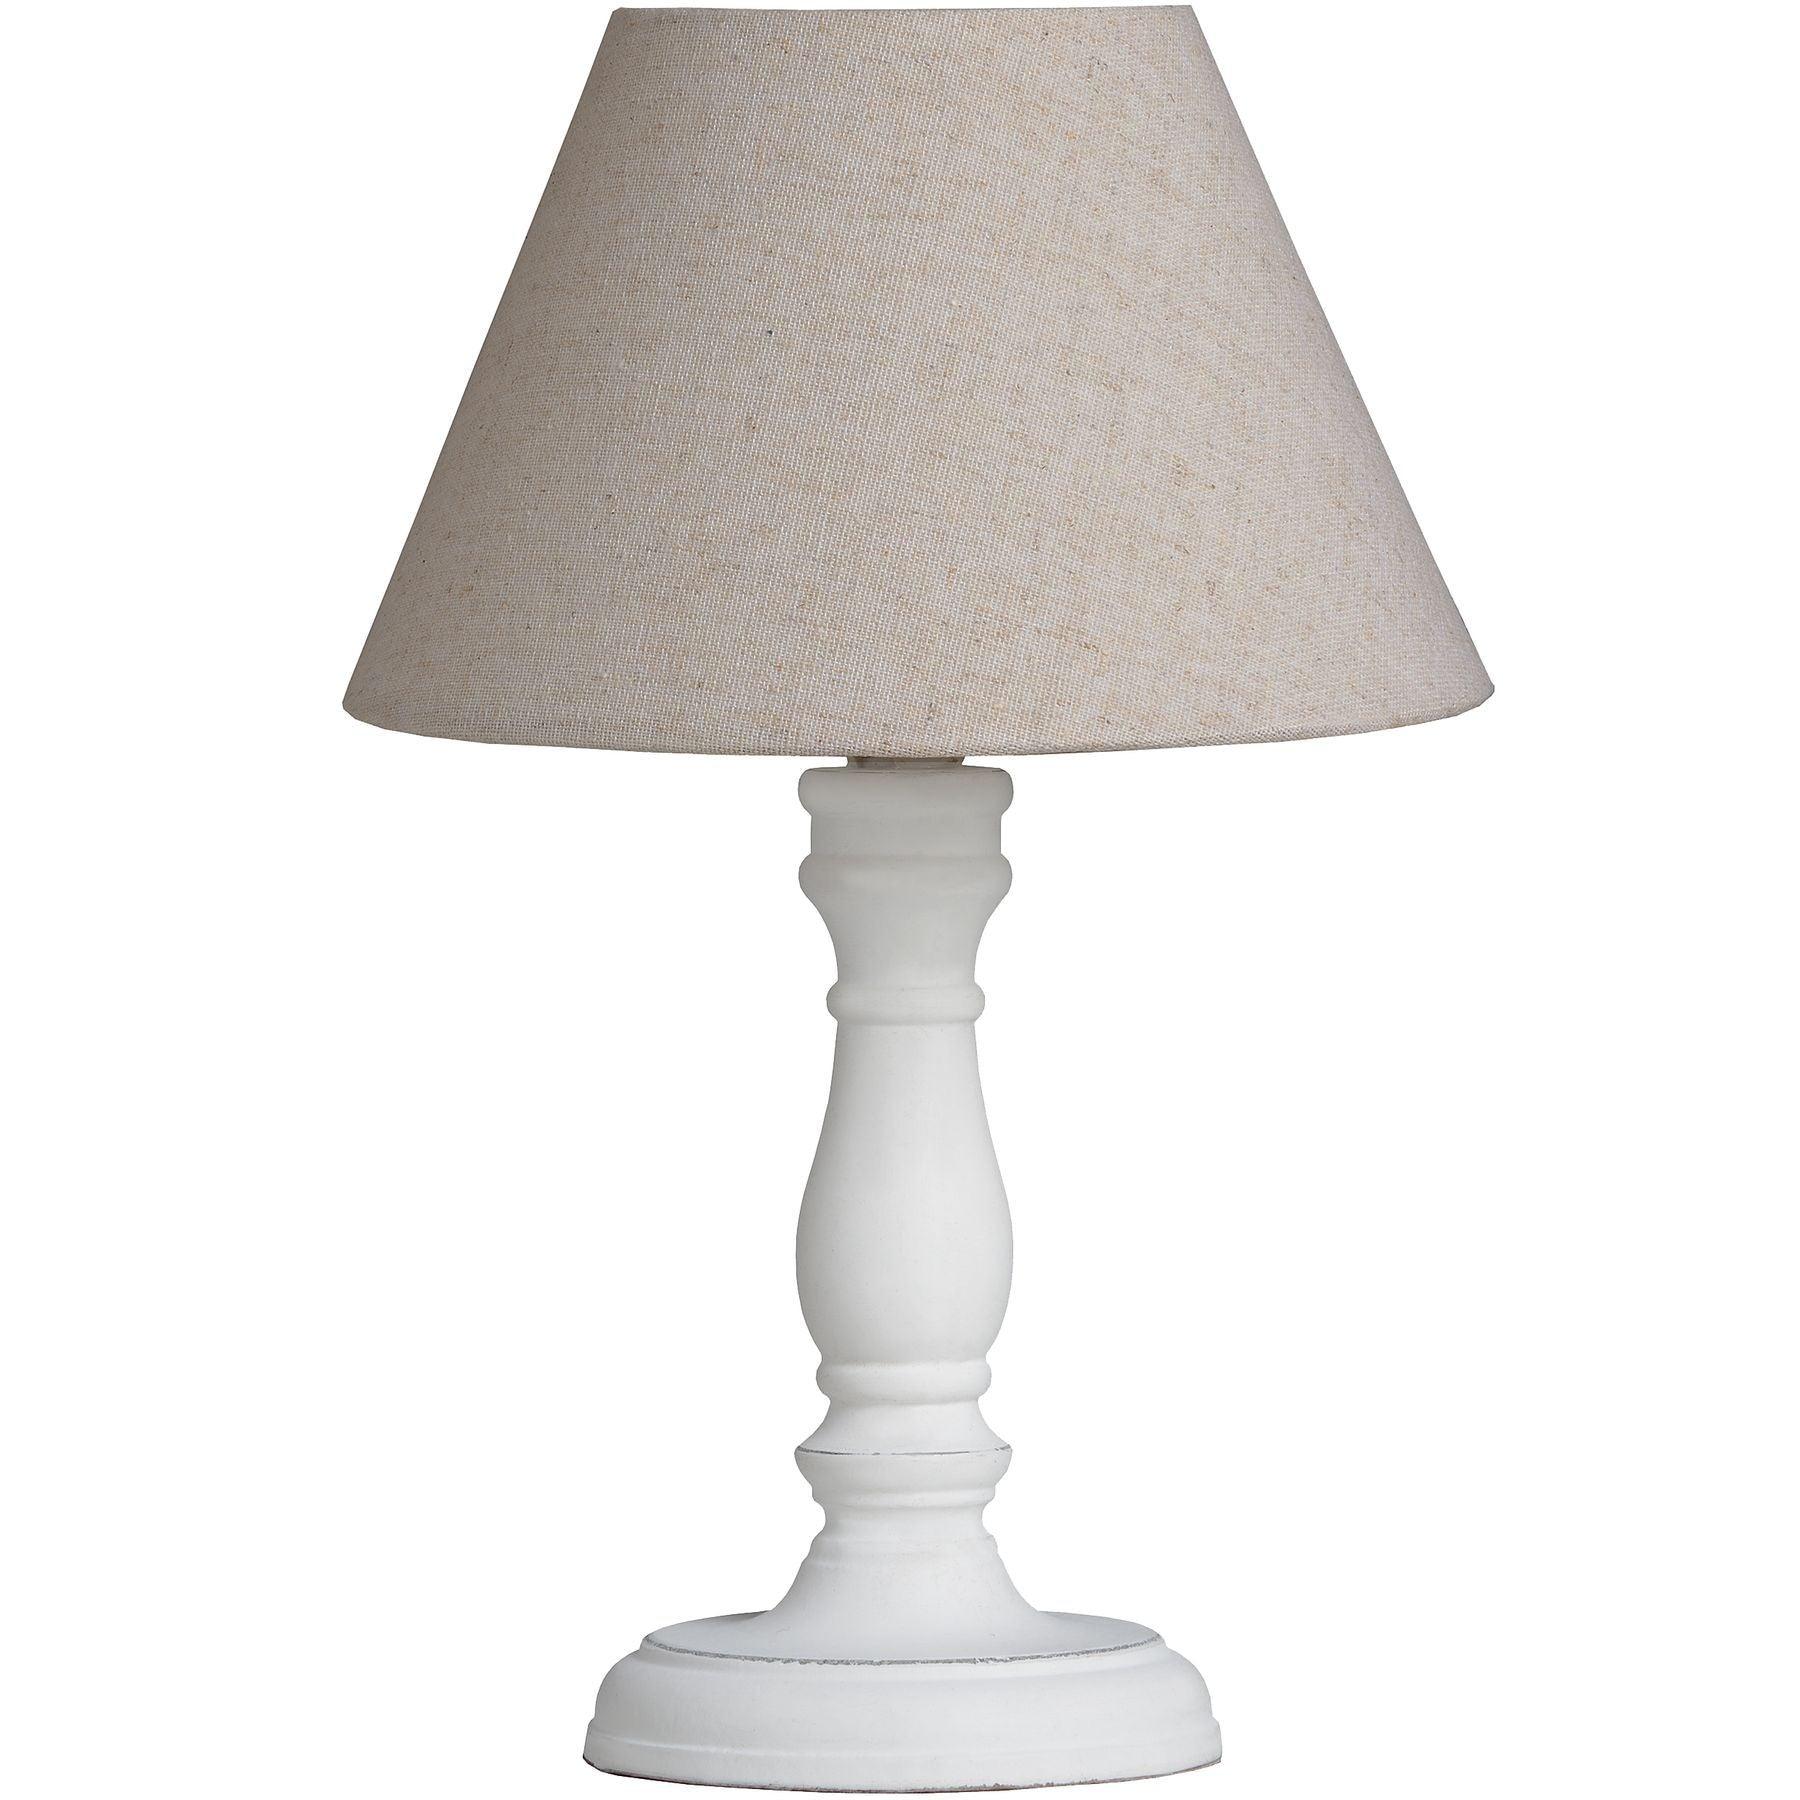 View Cyrene Table Lamp information